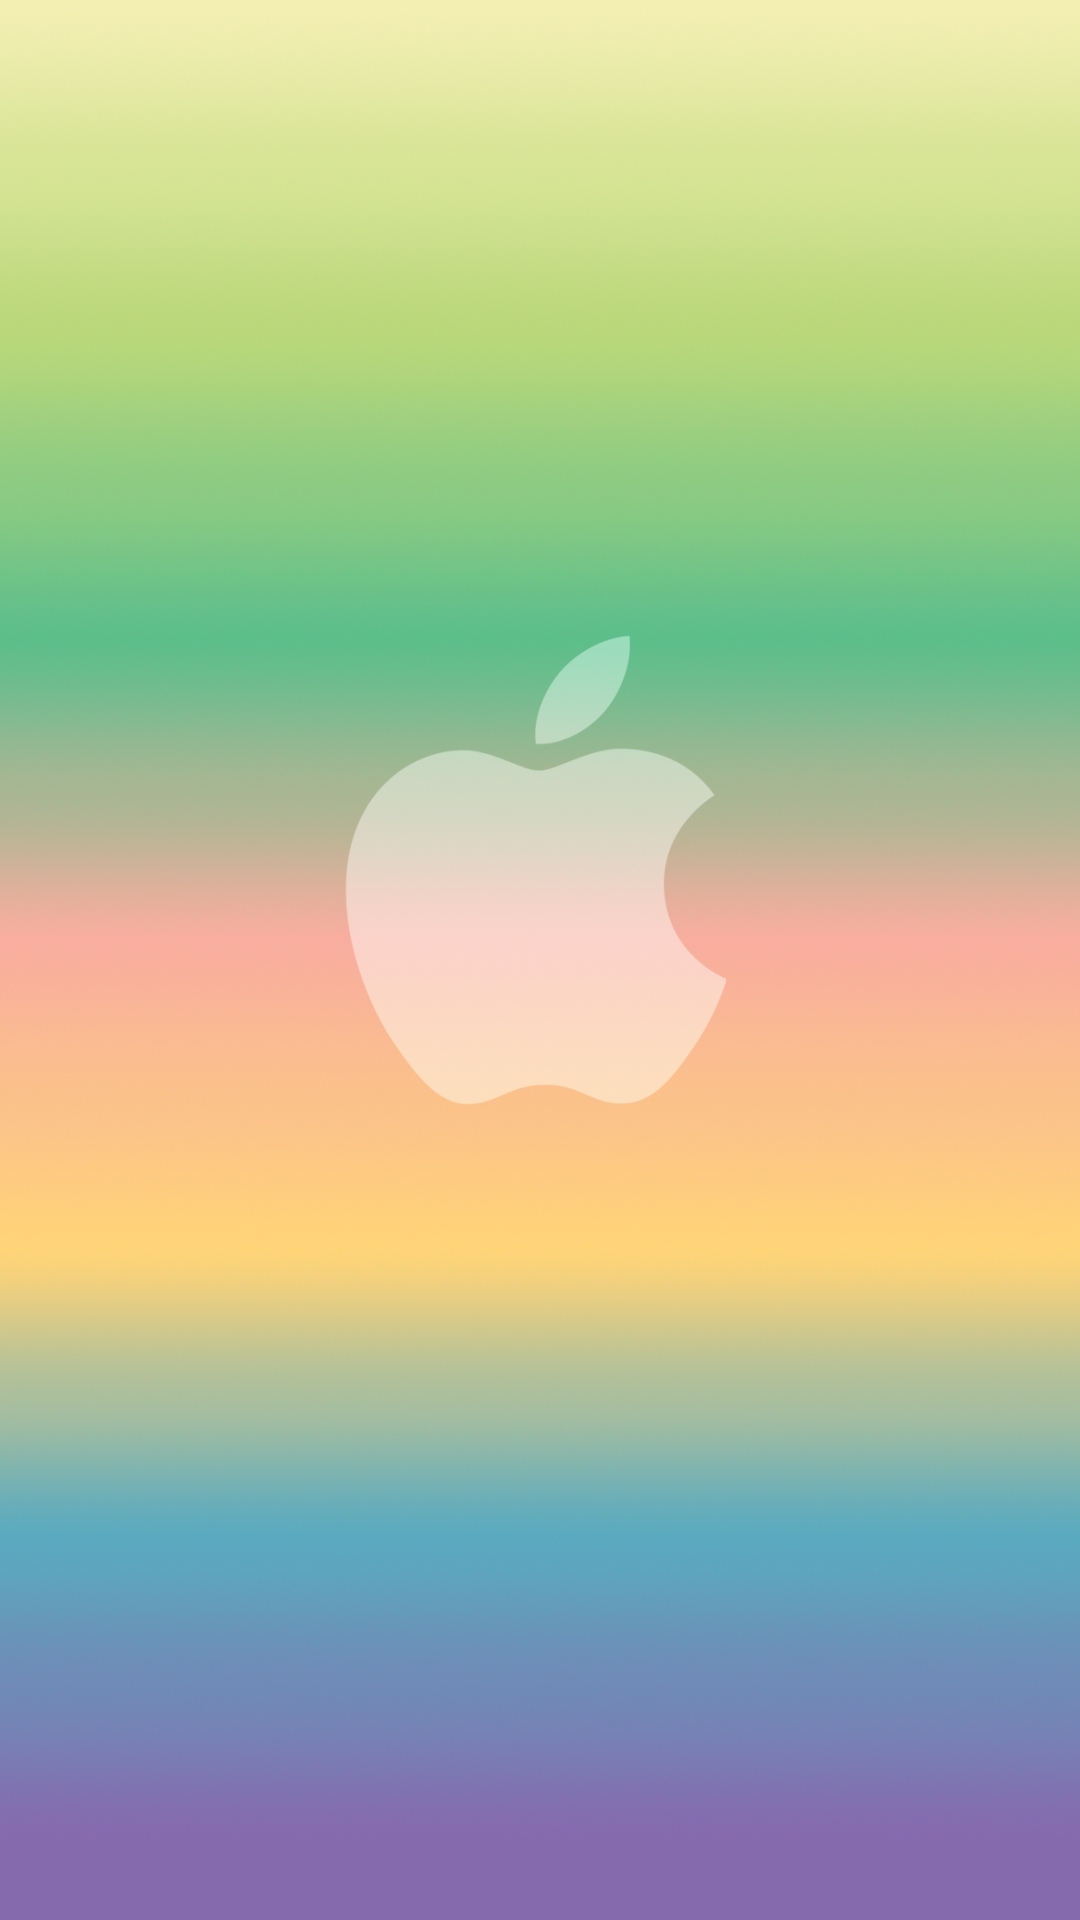 Download Apple Iphone Wallpaper High Definition #3voh6 ...